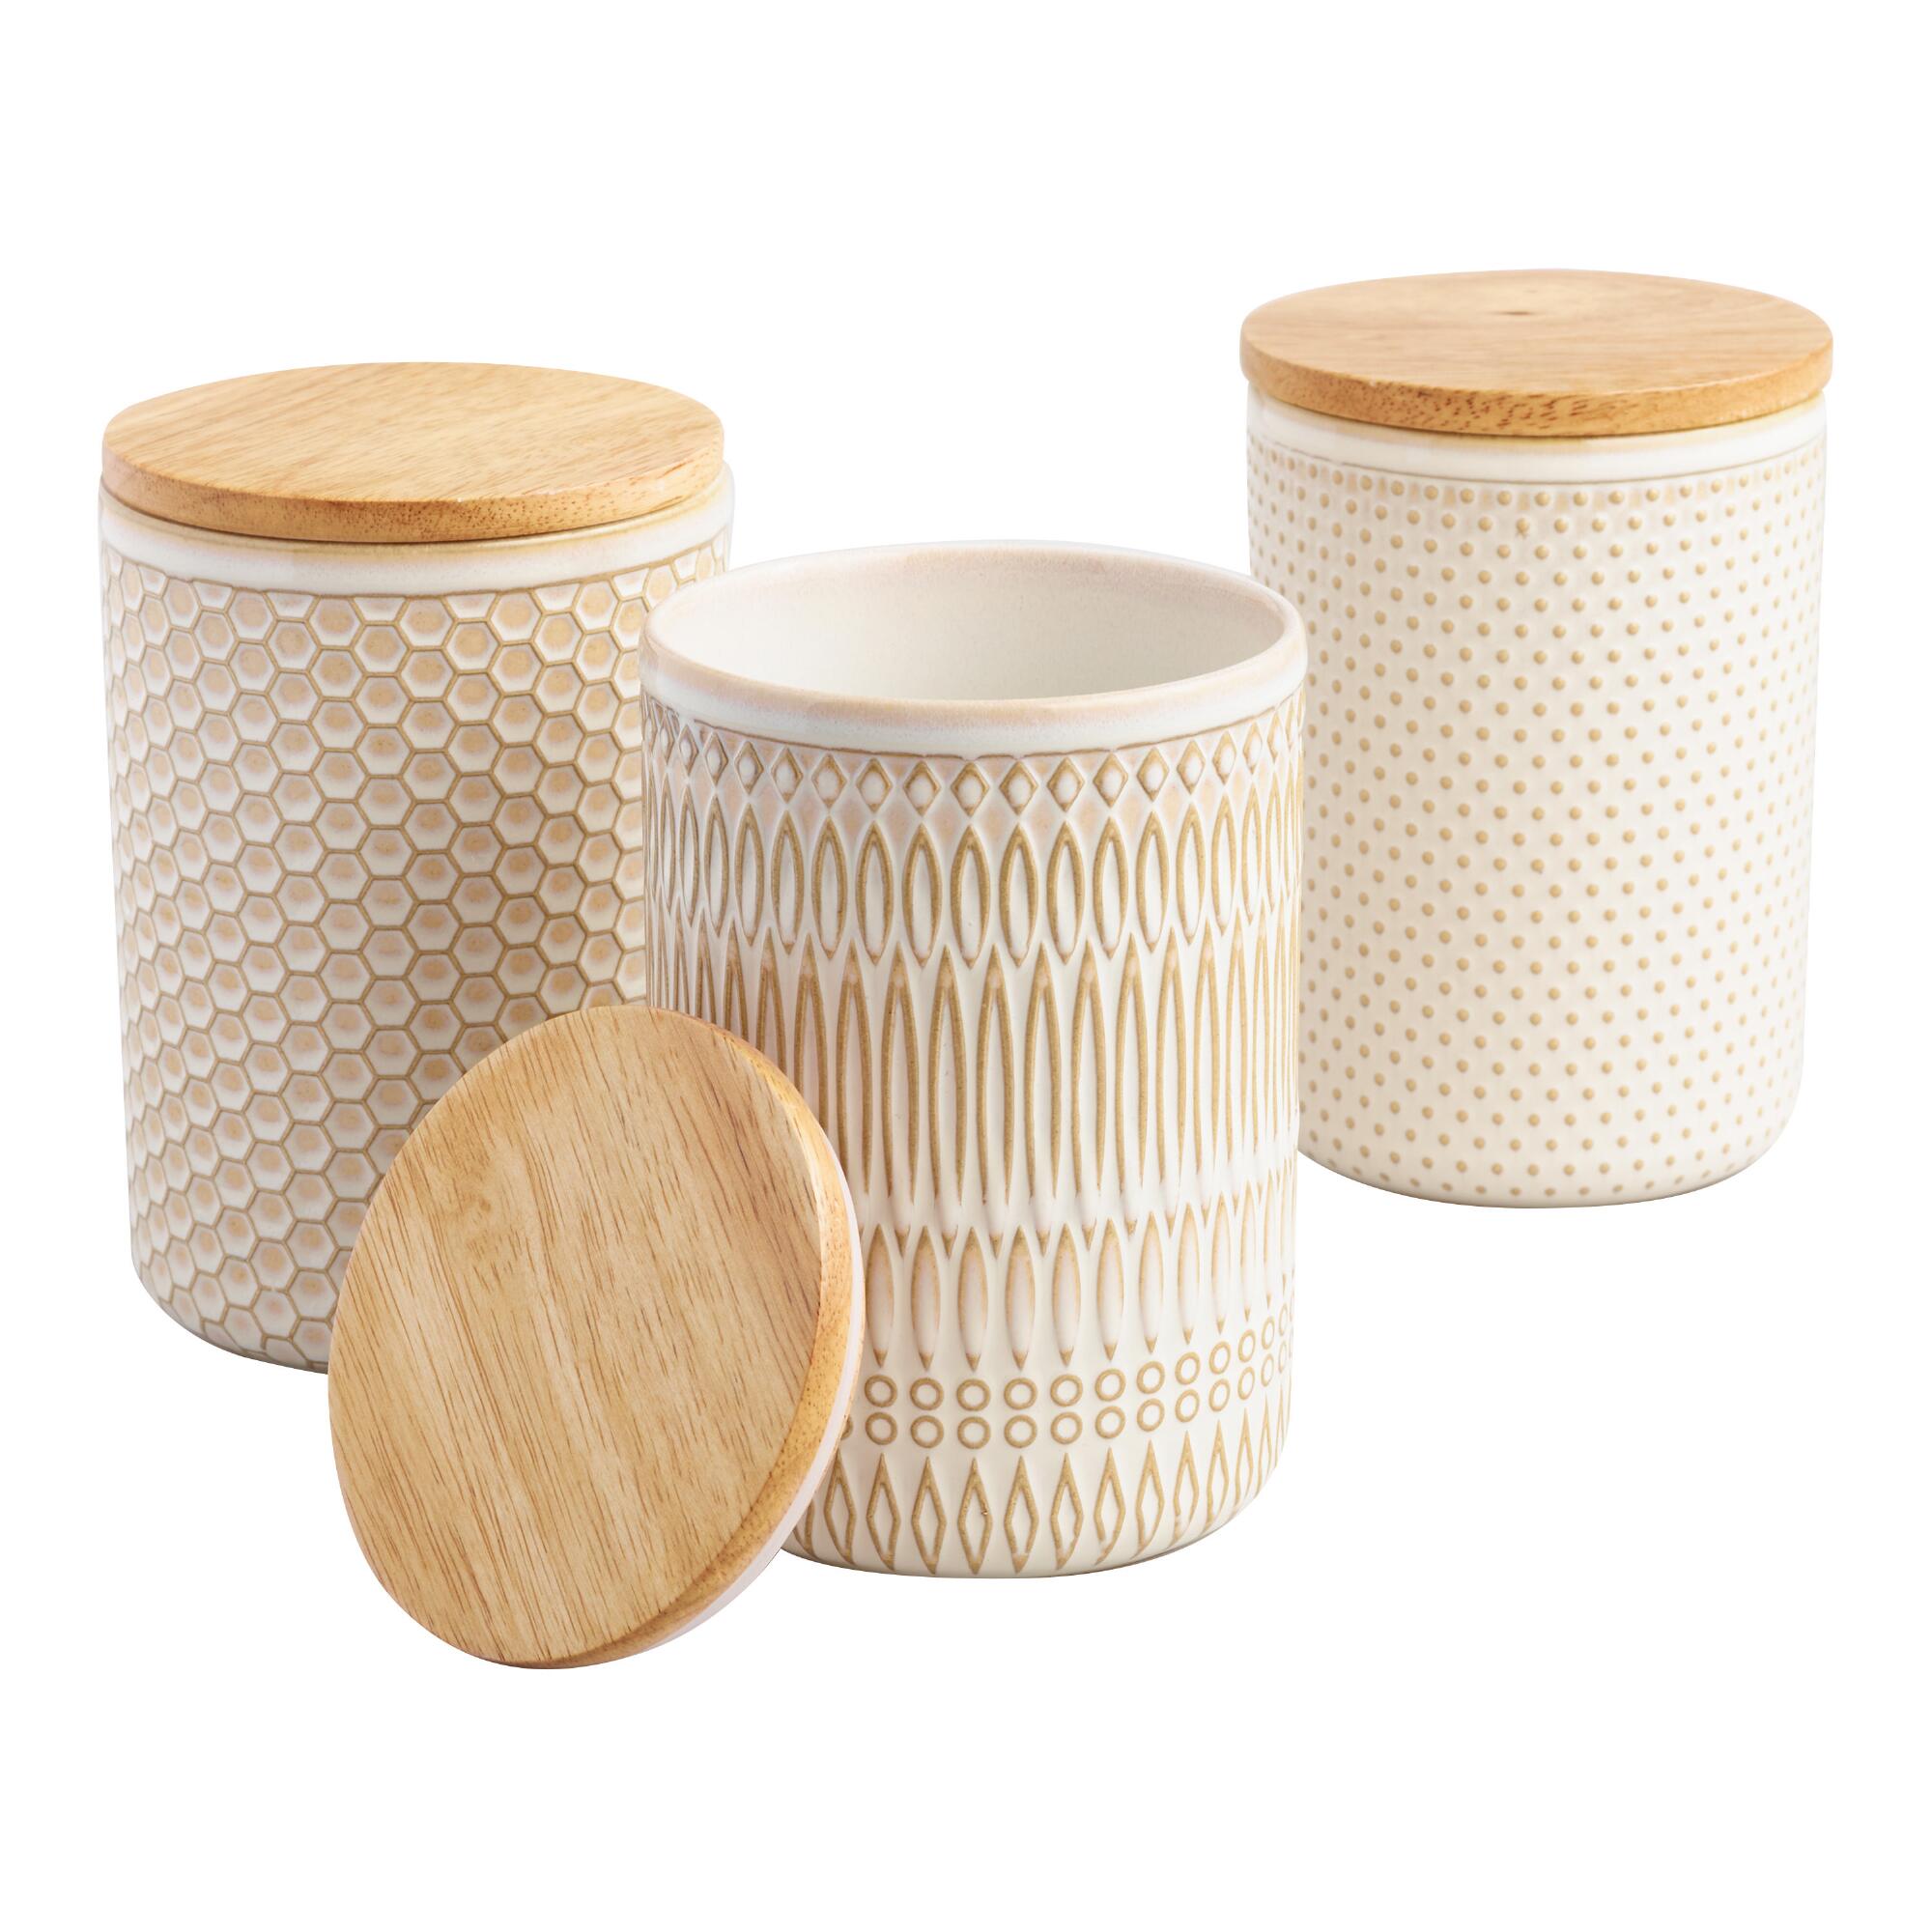 Textured Ceramic Storage Canisters with Wood Lids Set of 3 by World Market